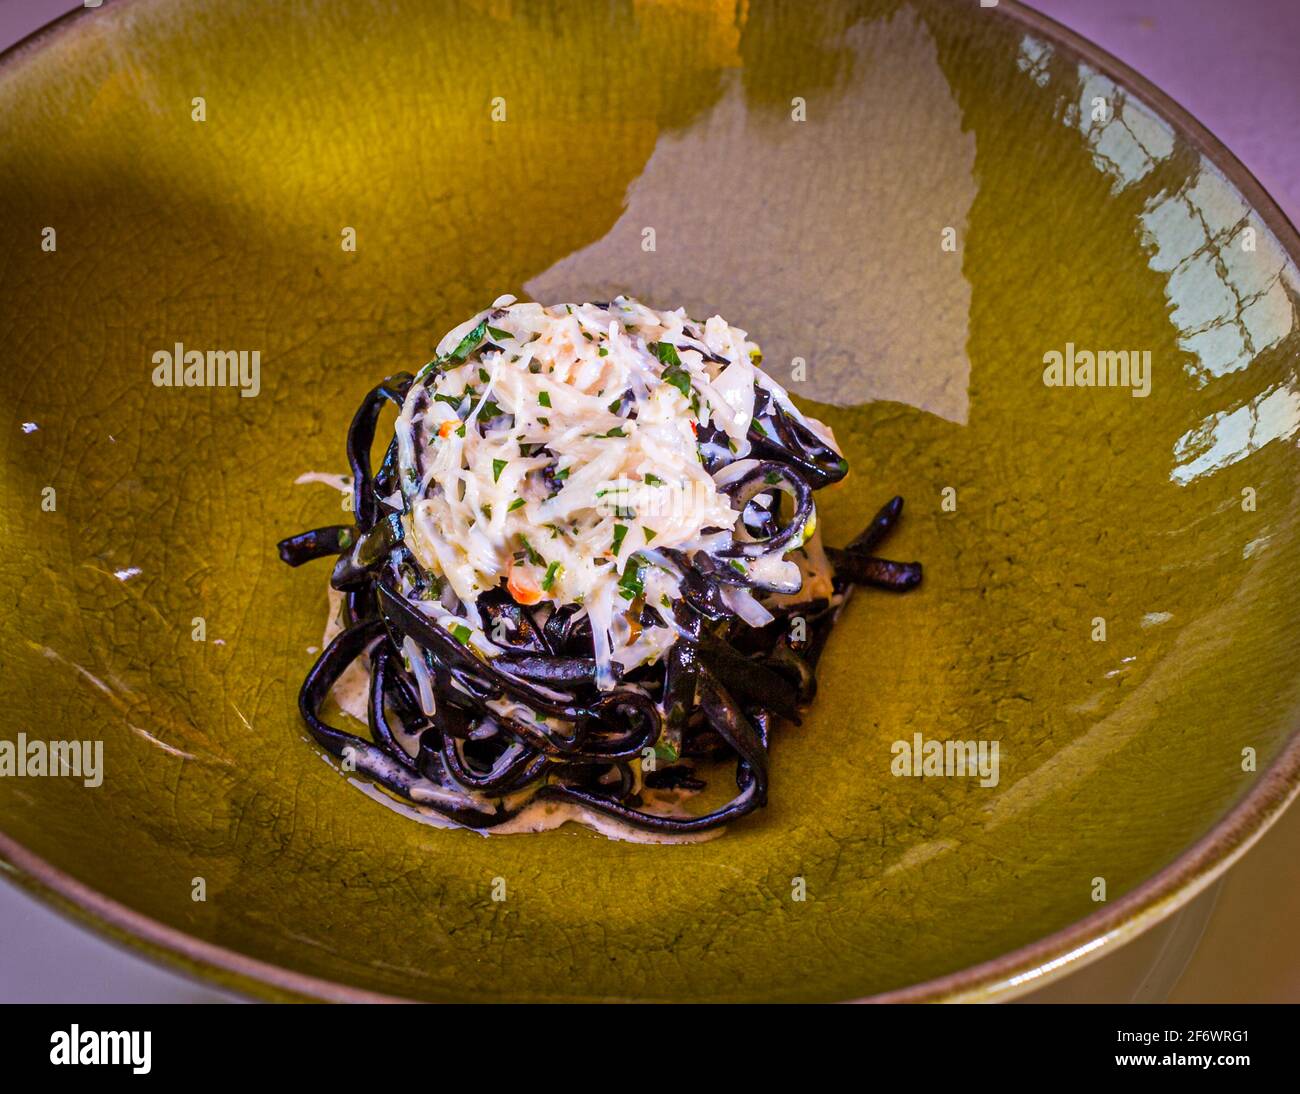 Maccaroni a la guitarra - Sepia noodles with crab meat and wild sorrel Stock Photo